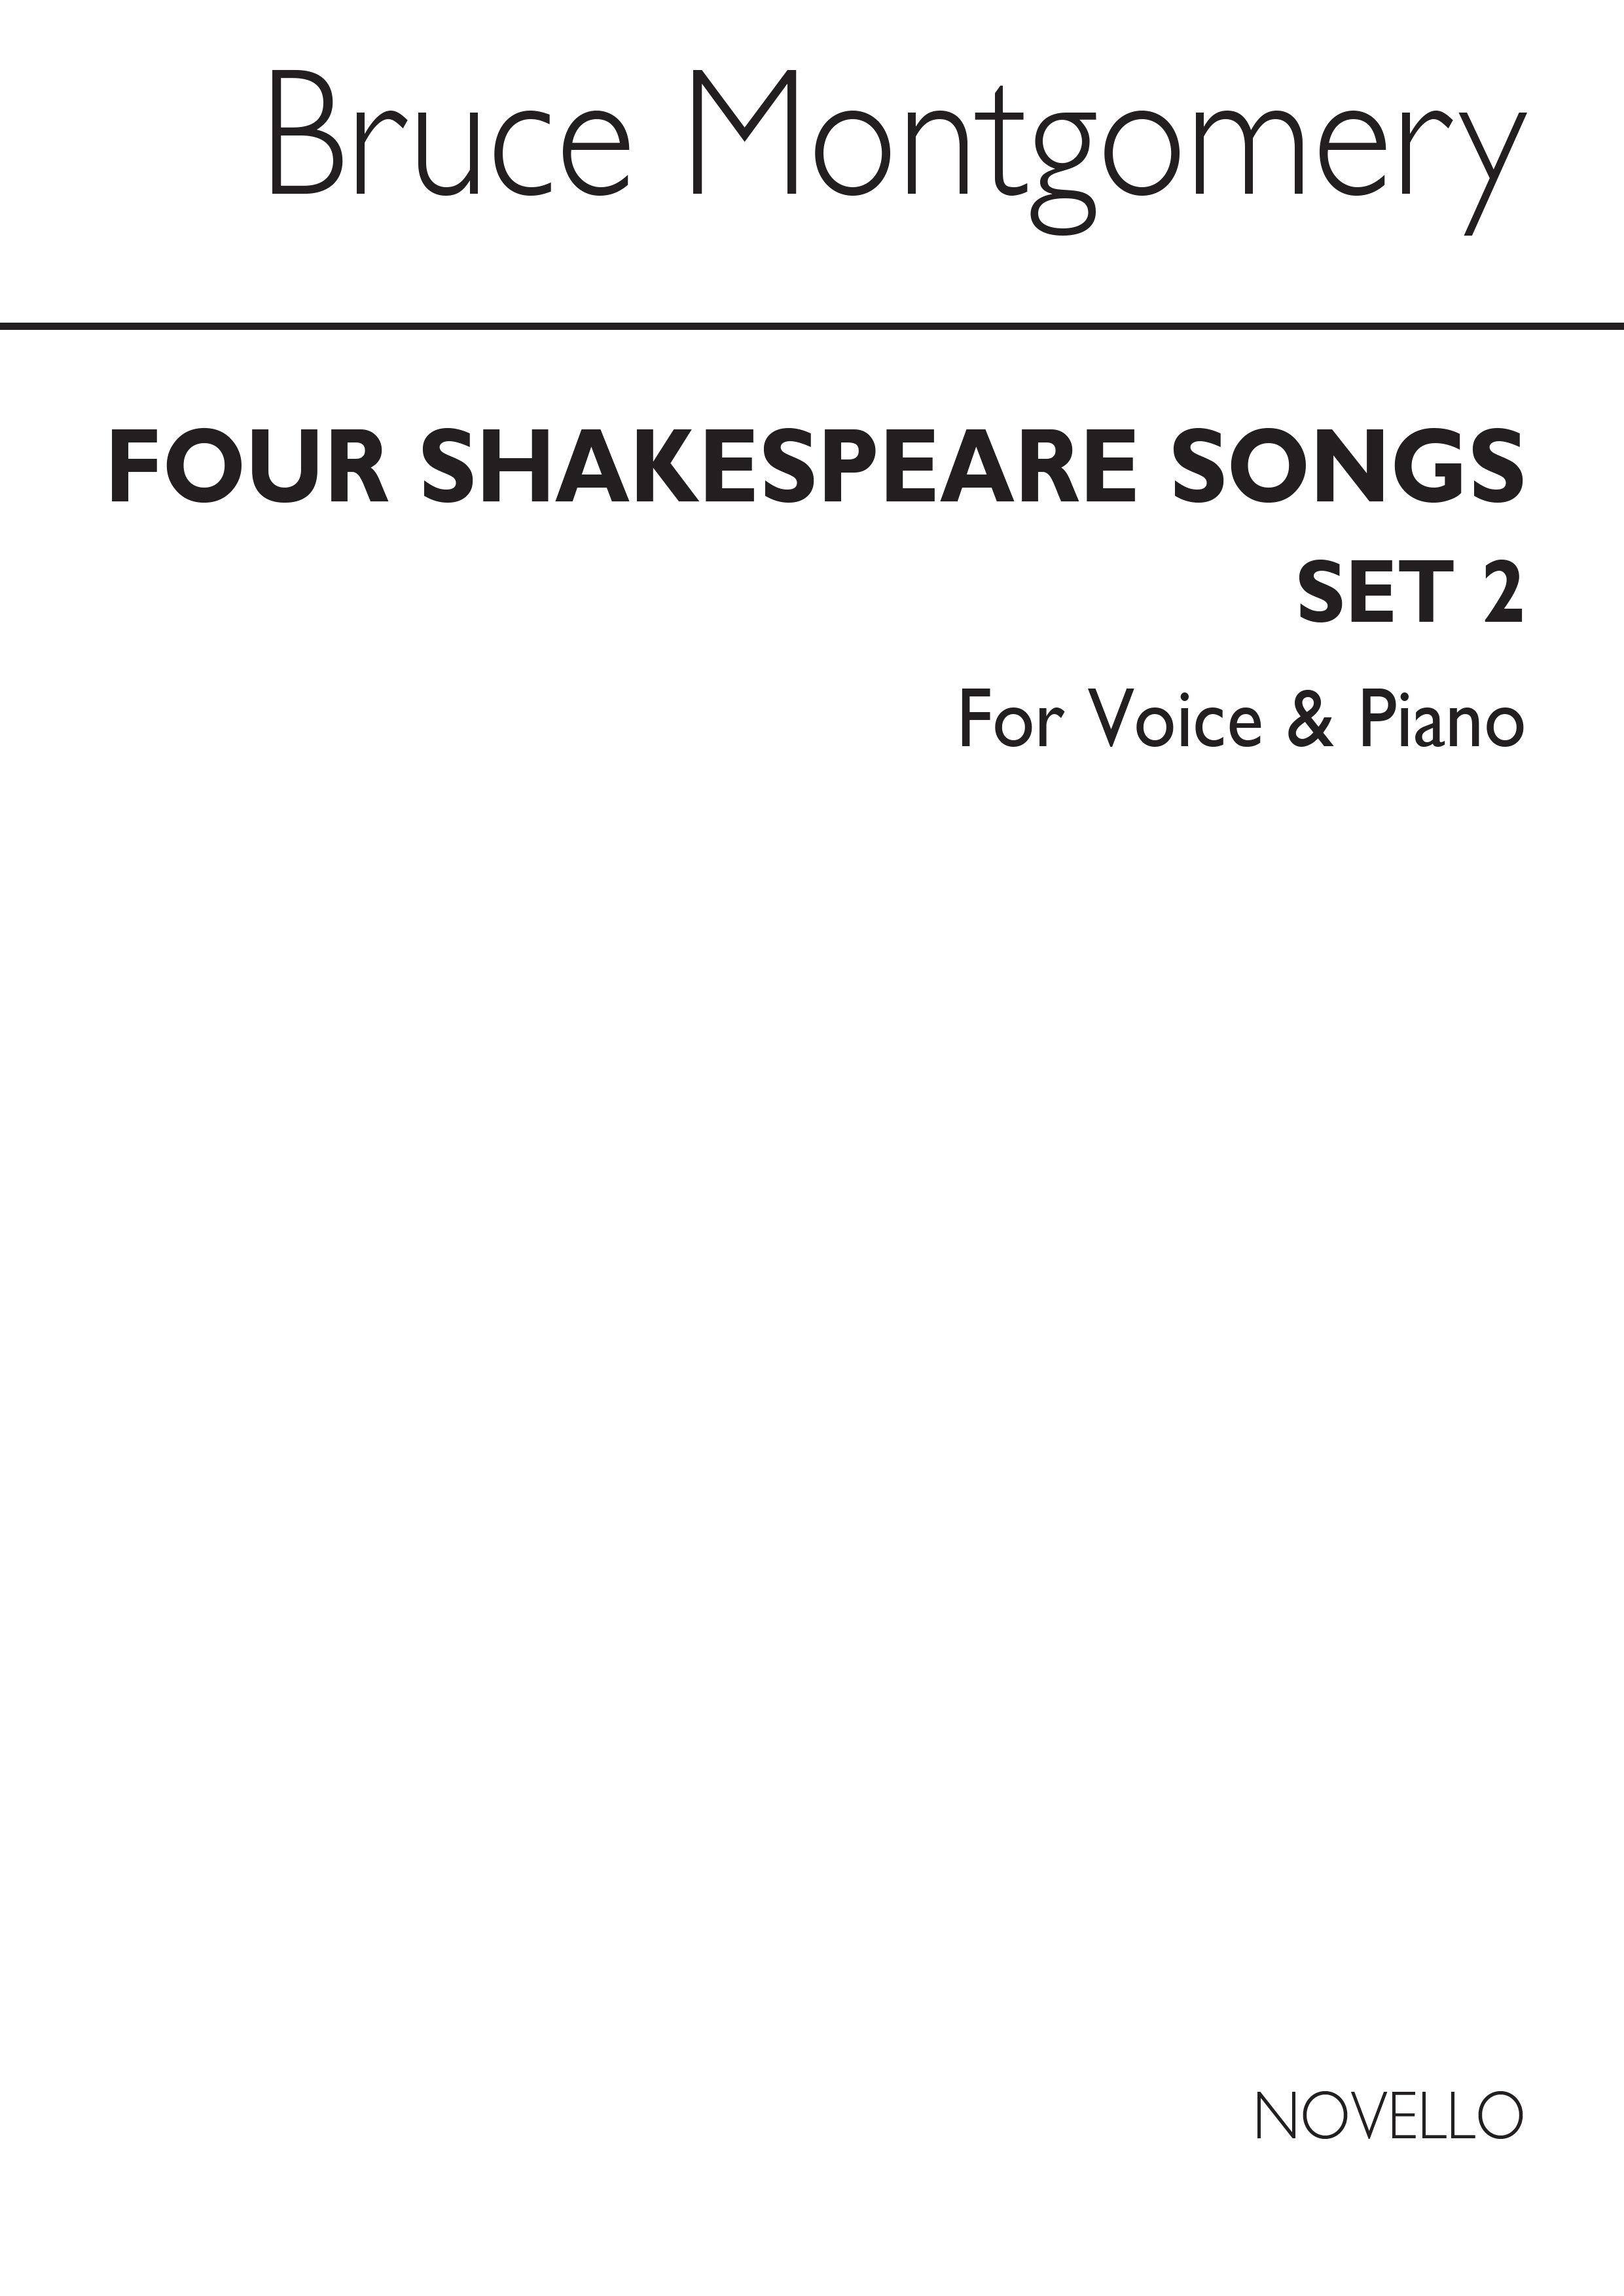 Bruce Montgomery: Four Shakespeare Songs Set 2